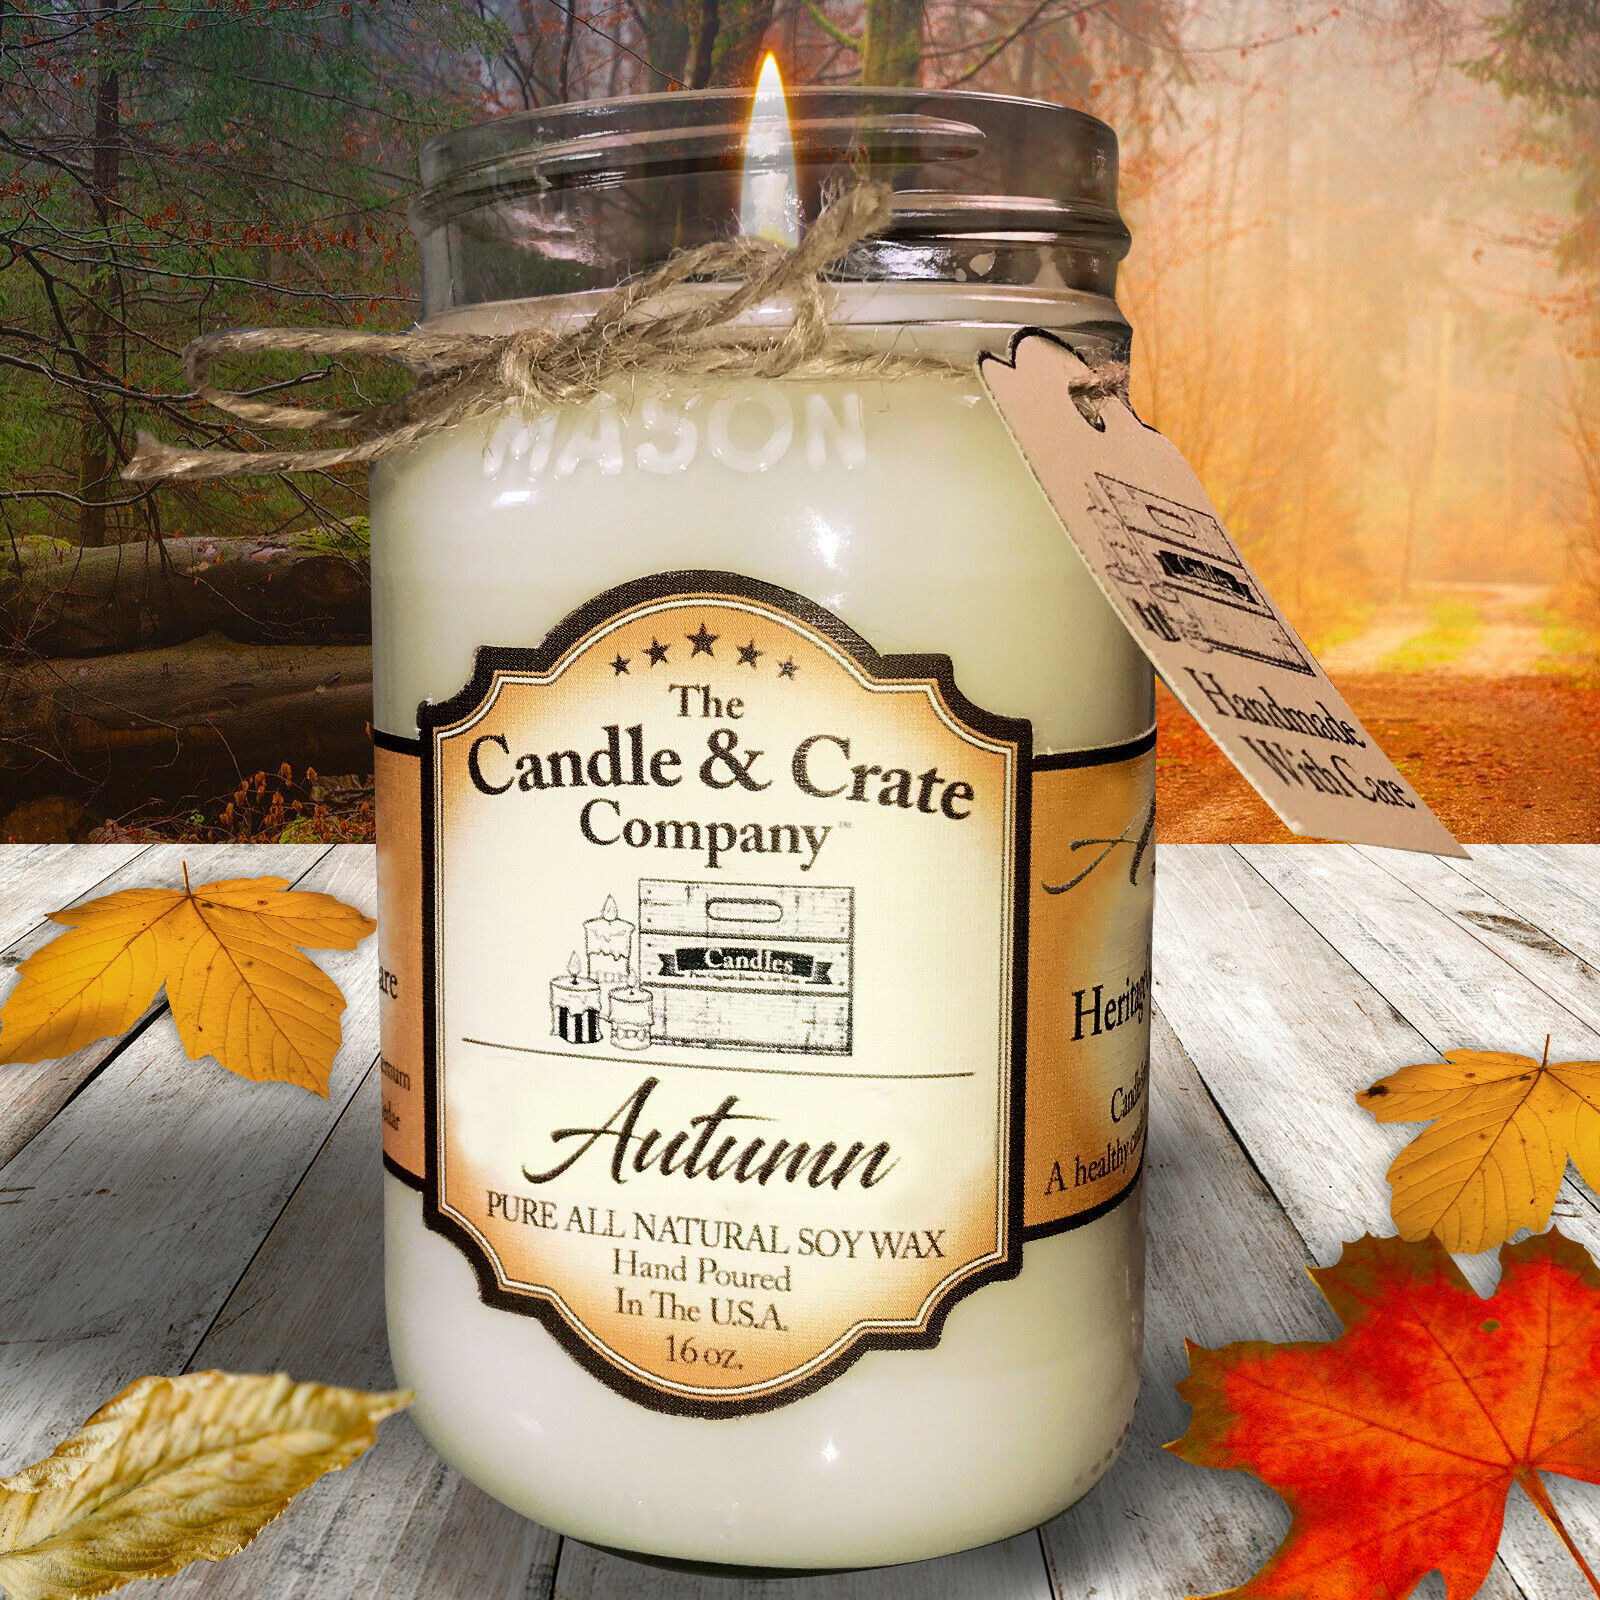 Autumn Scented, 16oz Mason Jar Candle, Max Scented 100% Natural Soy Wax